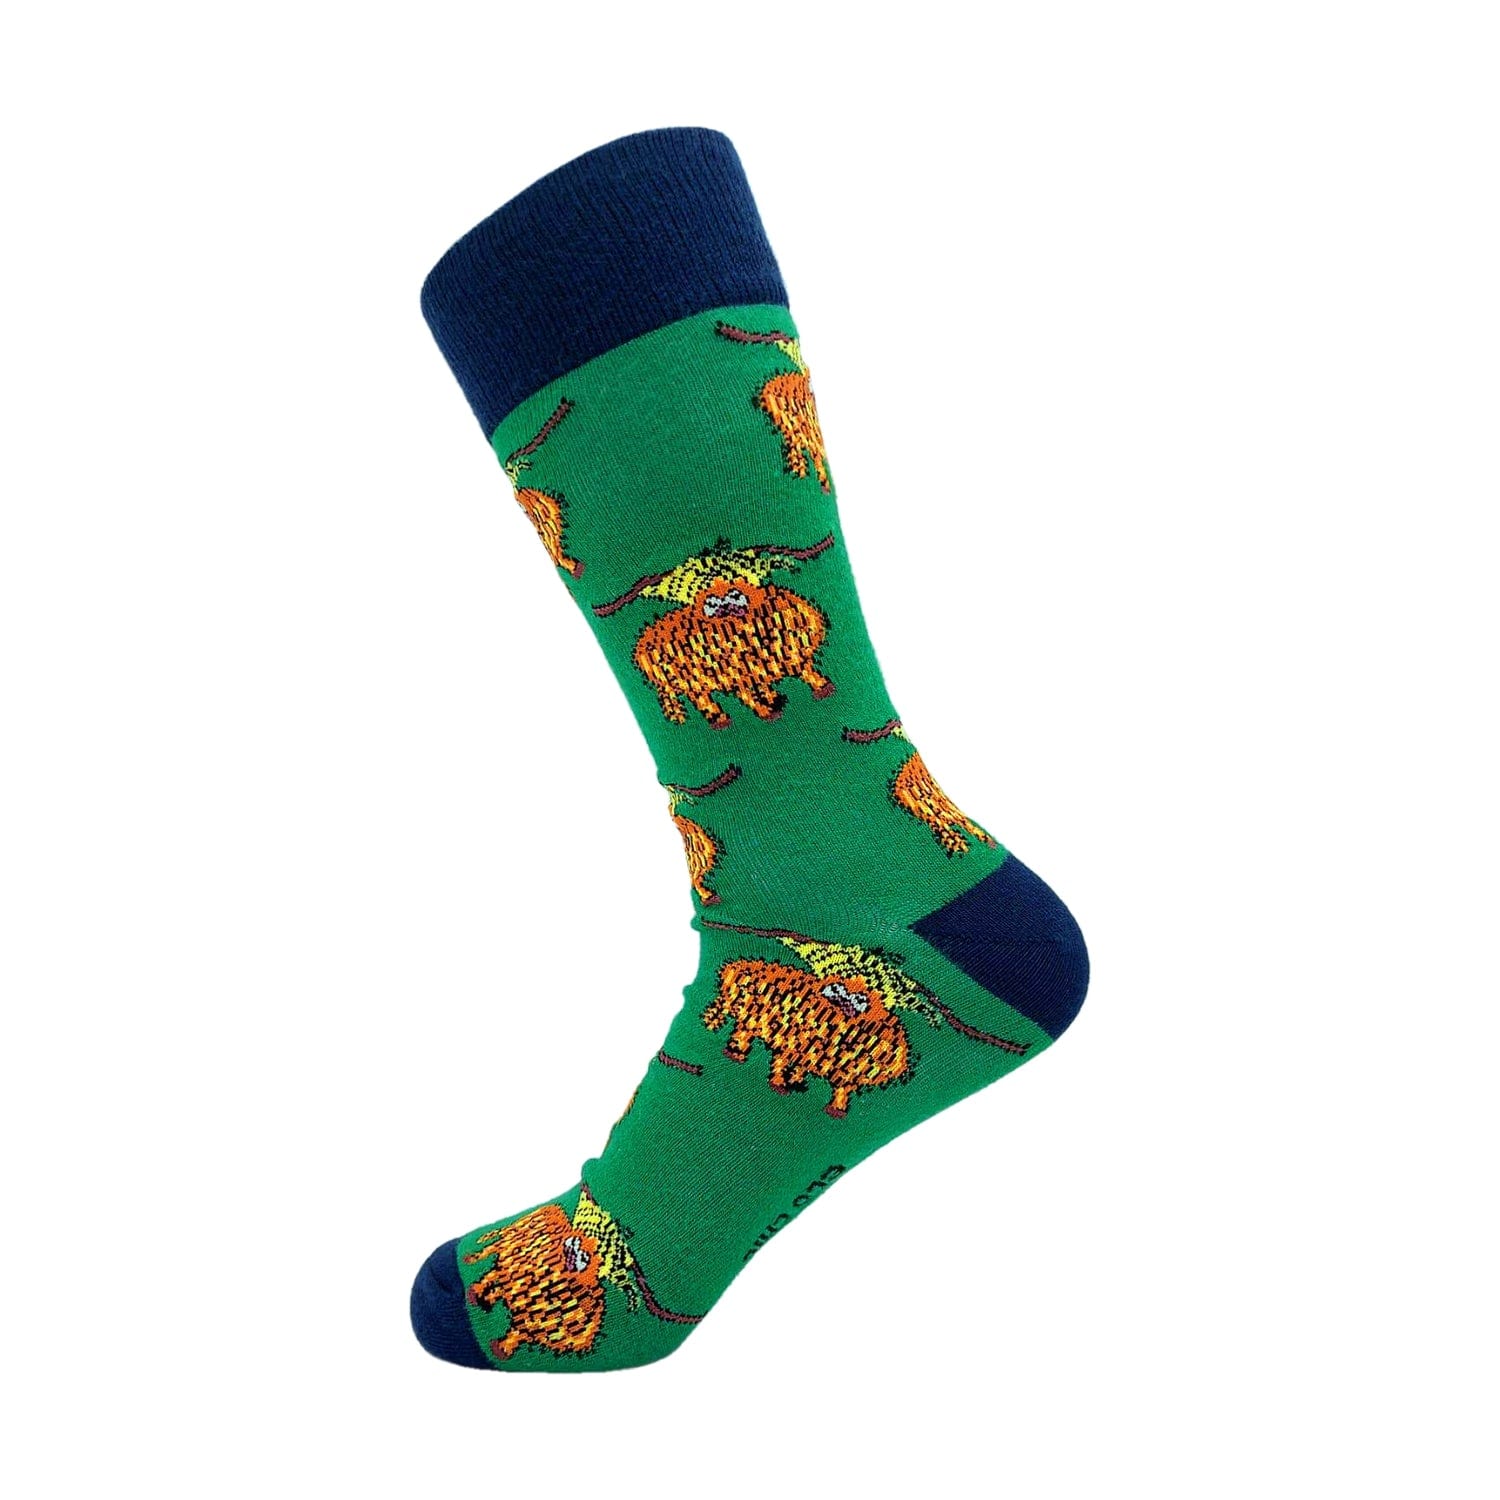 Eco Chic Green Eco Chic Eco-Friendly Bamboo Socks Highland Cow